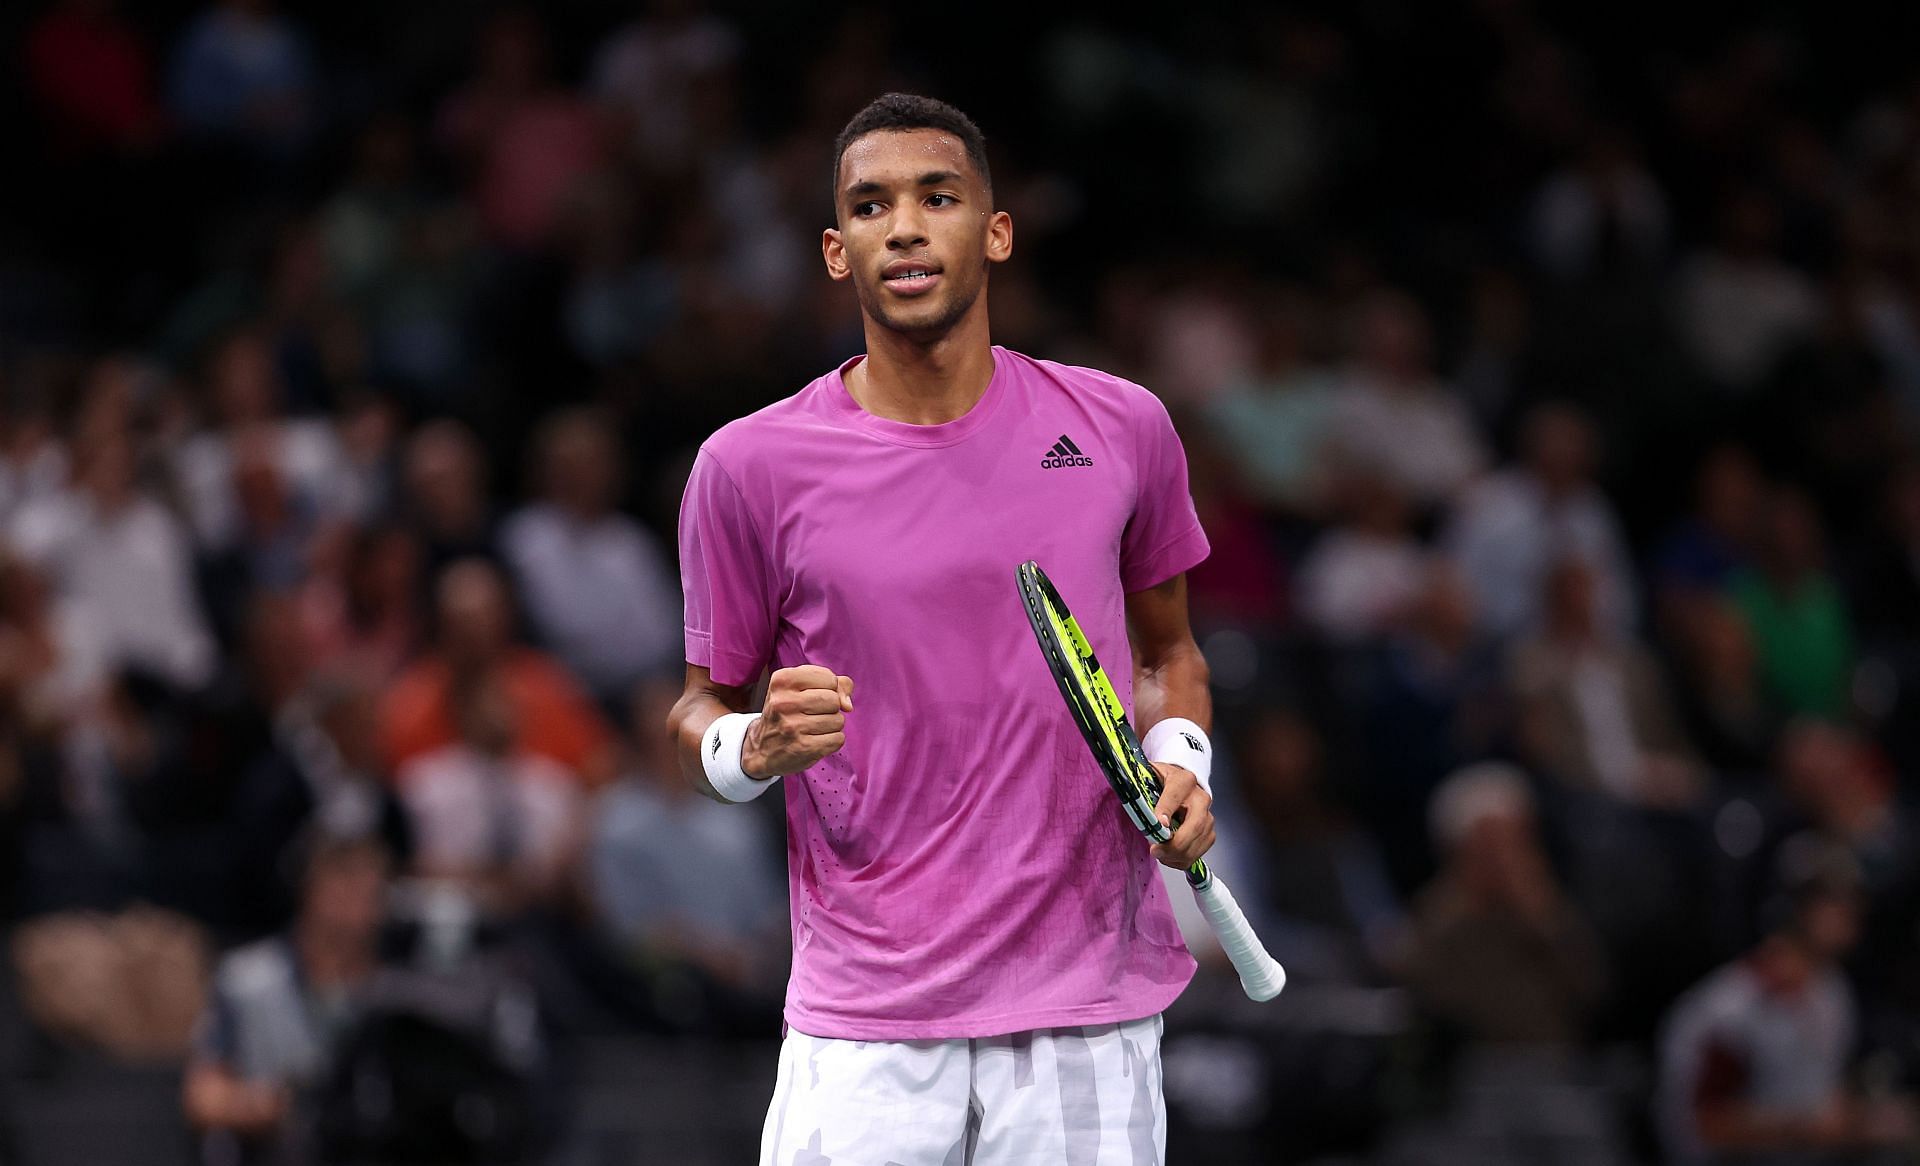 Felix Auger-Aliassime vs Holger Rune Where to watch, TV schedule, live streaming details and more 2022 Paris Masters